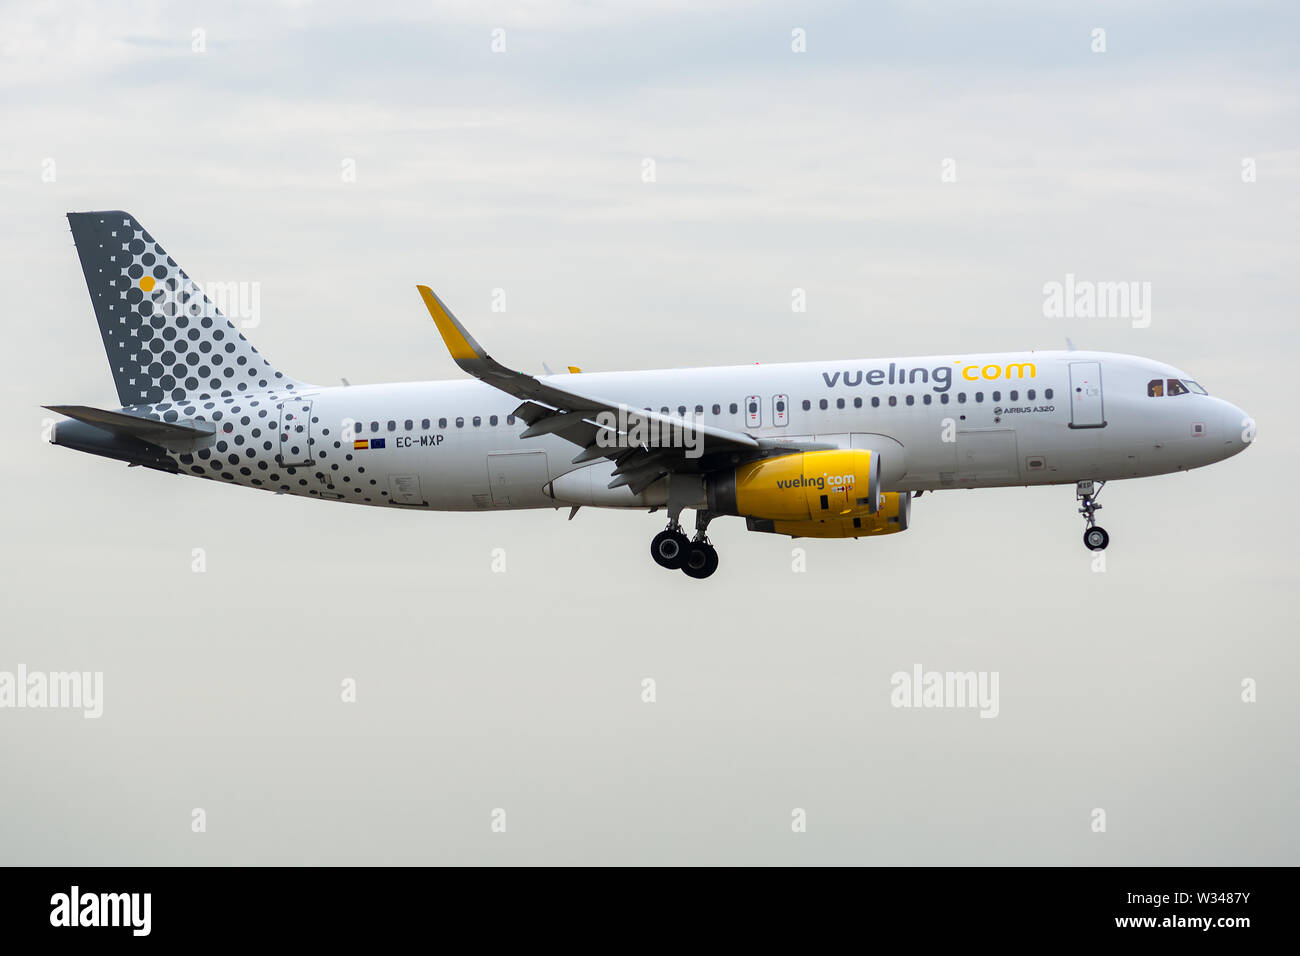 EC-MXP, July 11, 2019, Airbus A320-232-8244 landing at Paris Charles de Gaulle airport at the end of flight Vueling VY8830 from Seville Stock Photo